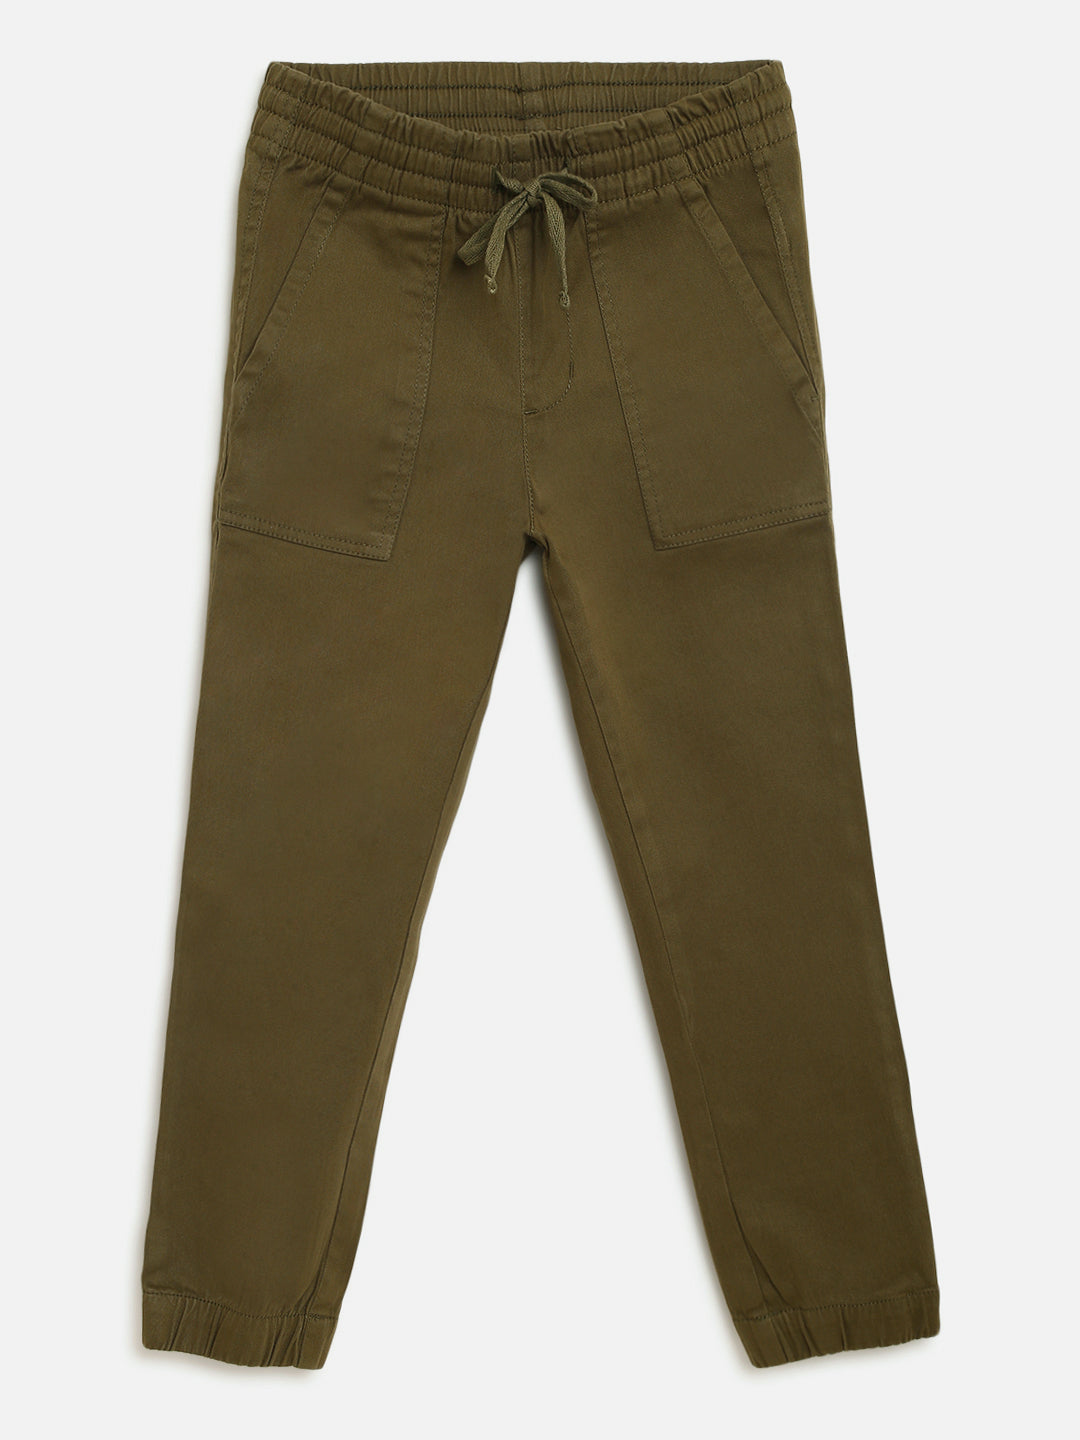 Buy Boys Green Solid Slim Fit Casual Cotton Jogger Sweatpants online at  Apparel Bliss